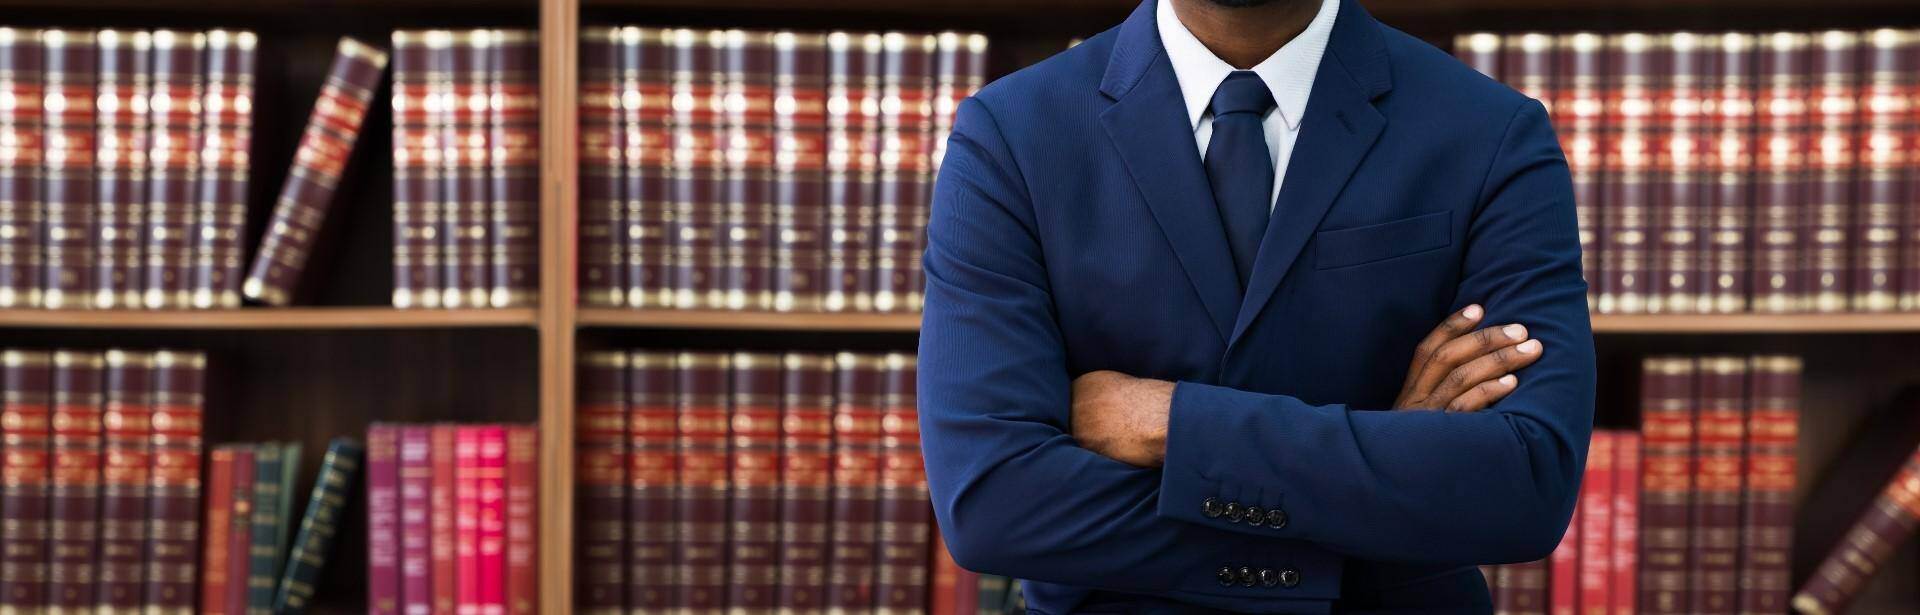 A black lawyer standing in front of a bookshelf of law book in Stockbridge, Georgia